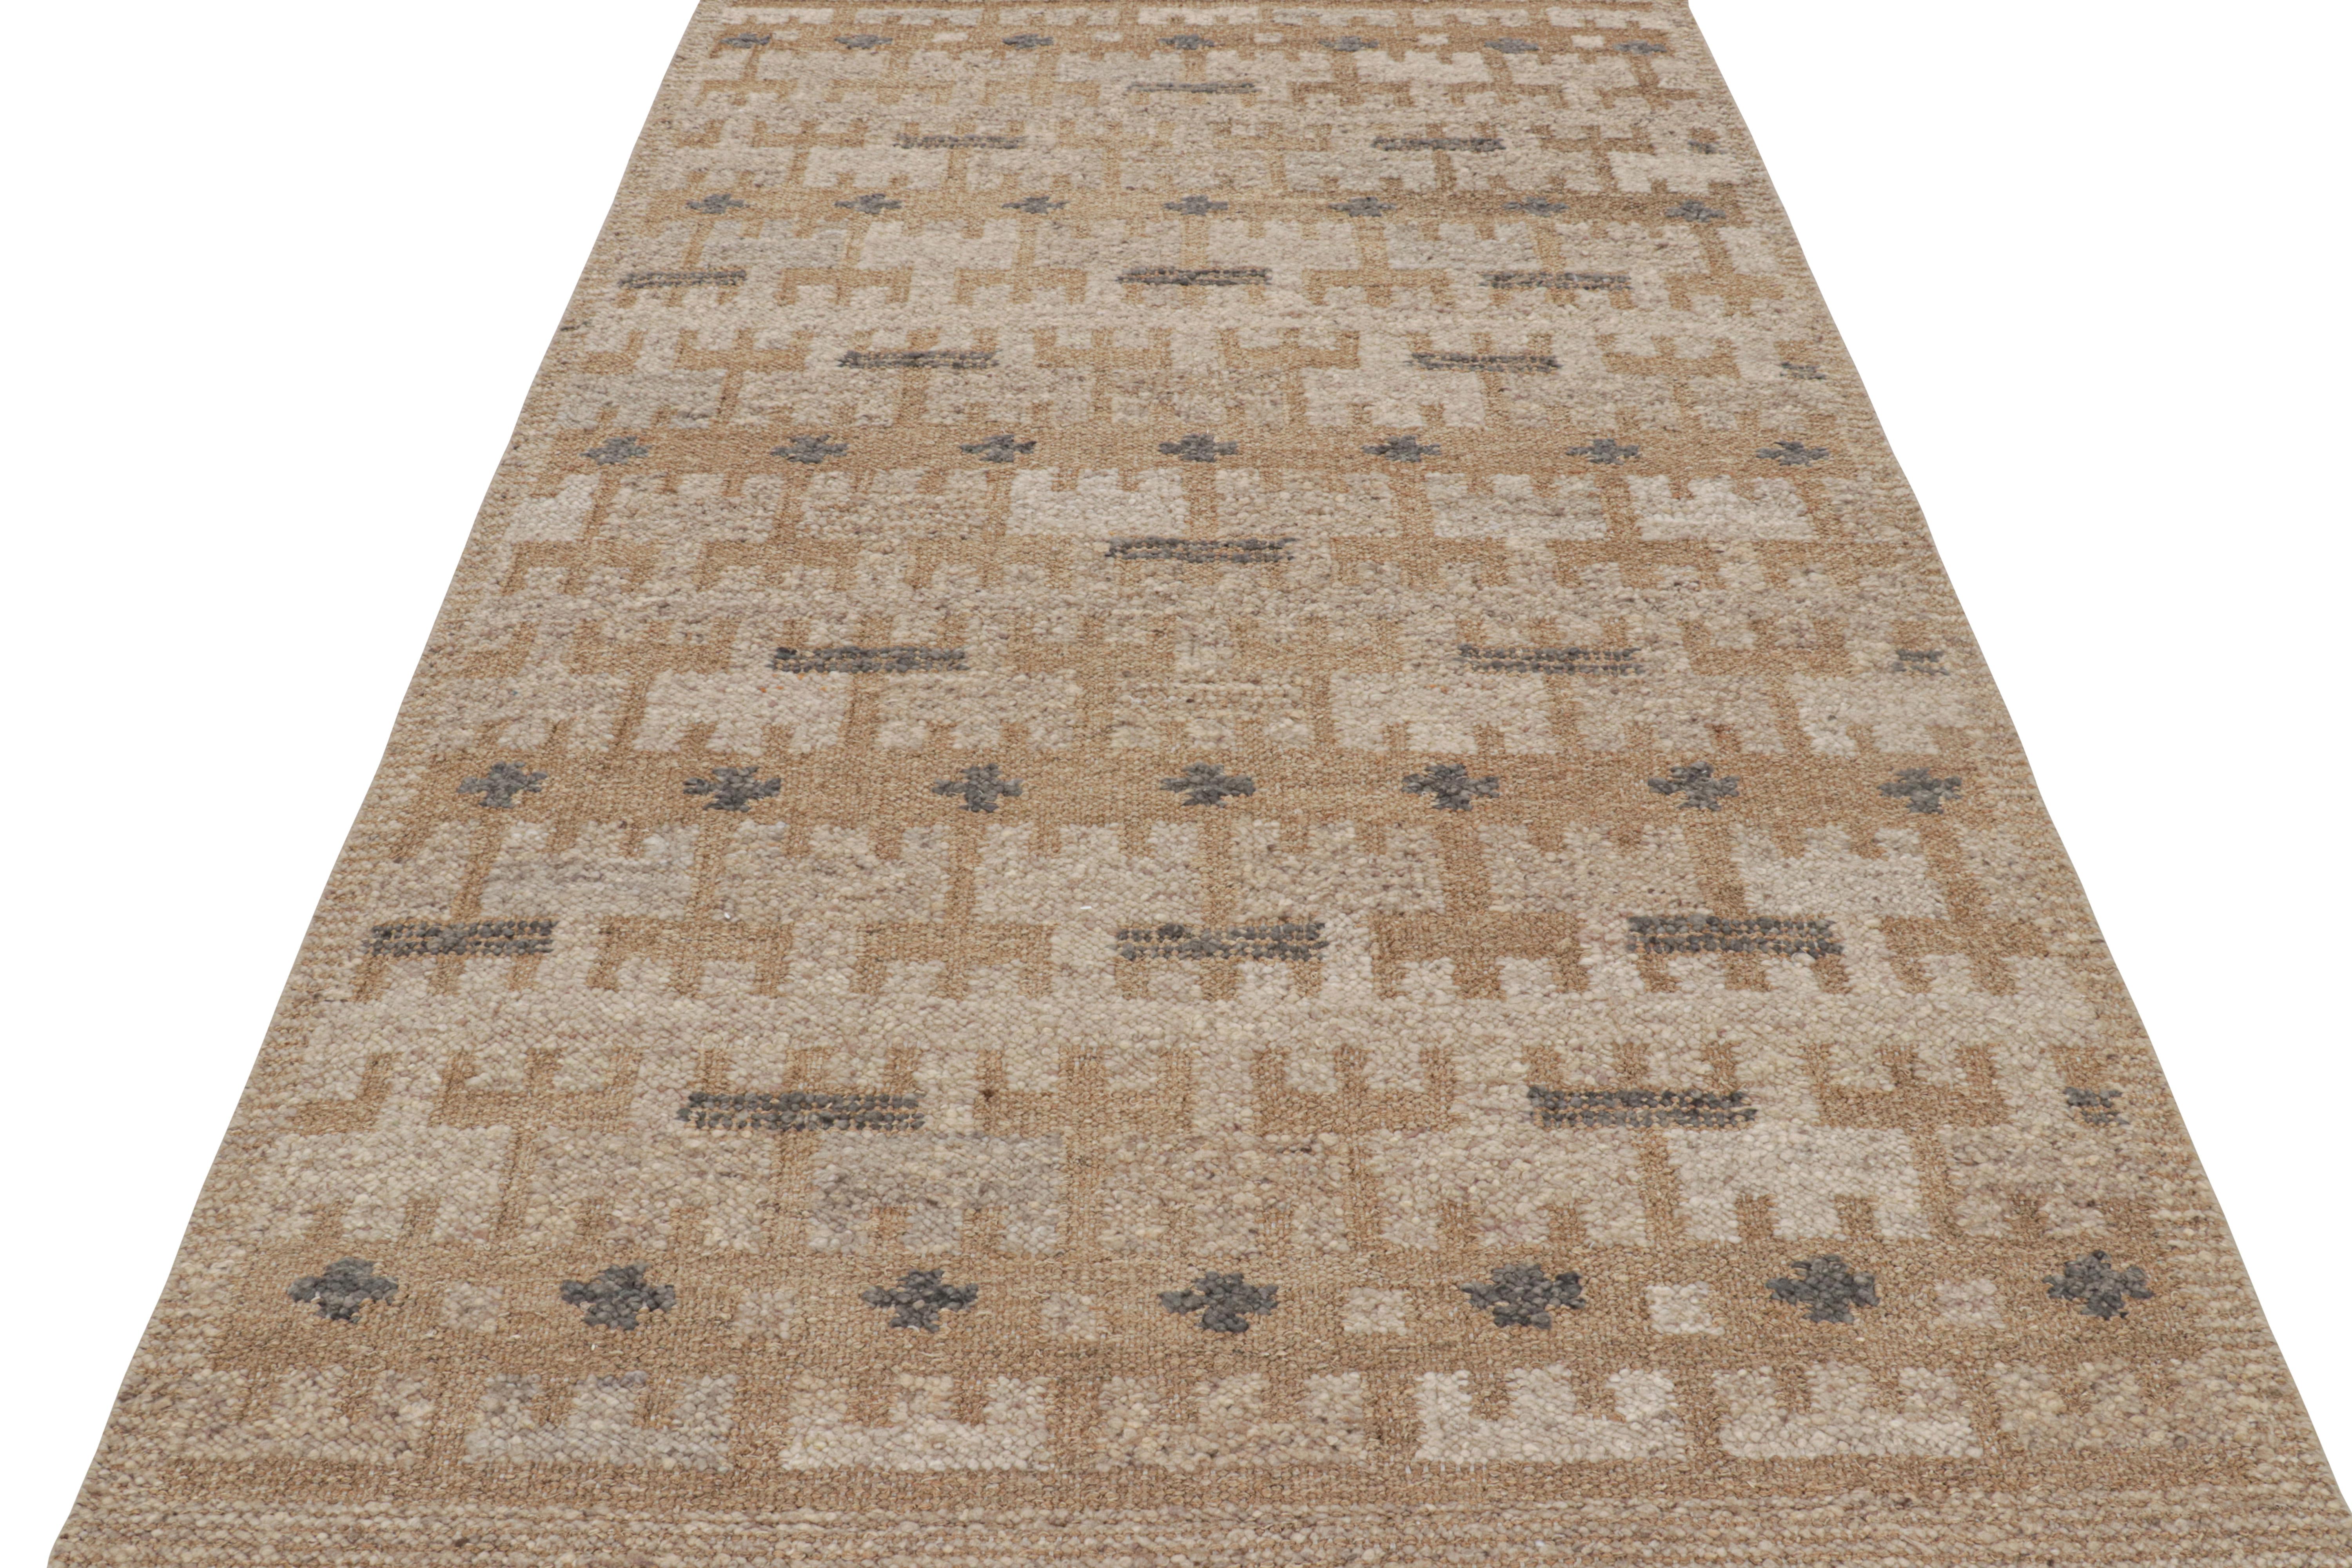 Hand-Woven Rug & Kilim’s Scandinavian Style Rug in Beige-Brown Geometric Patterns For Sale